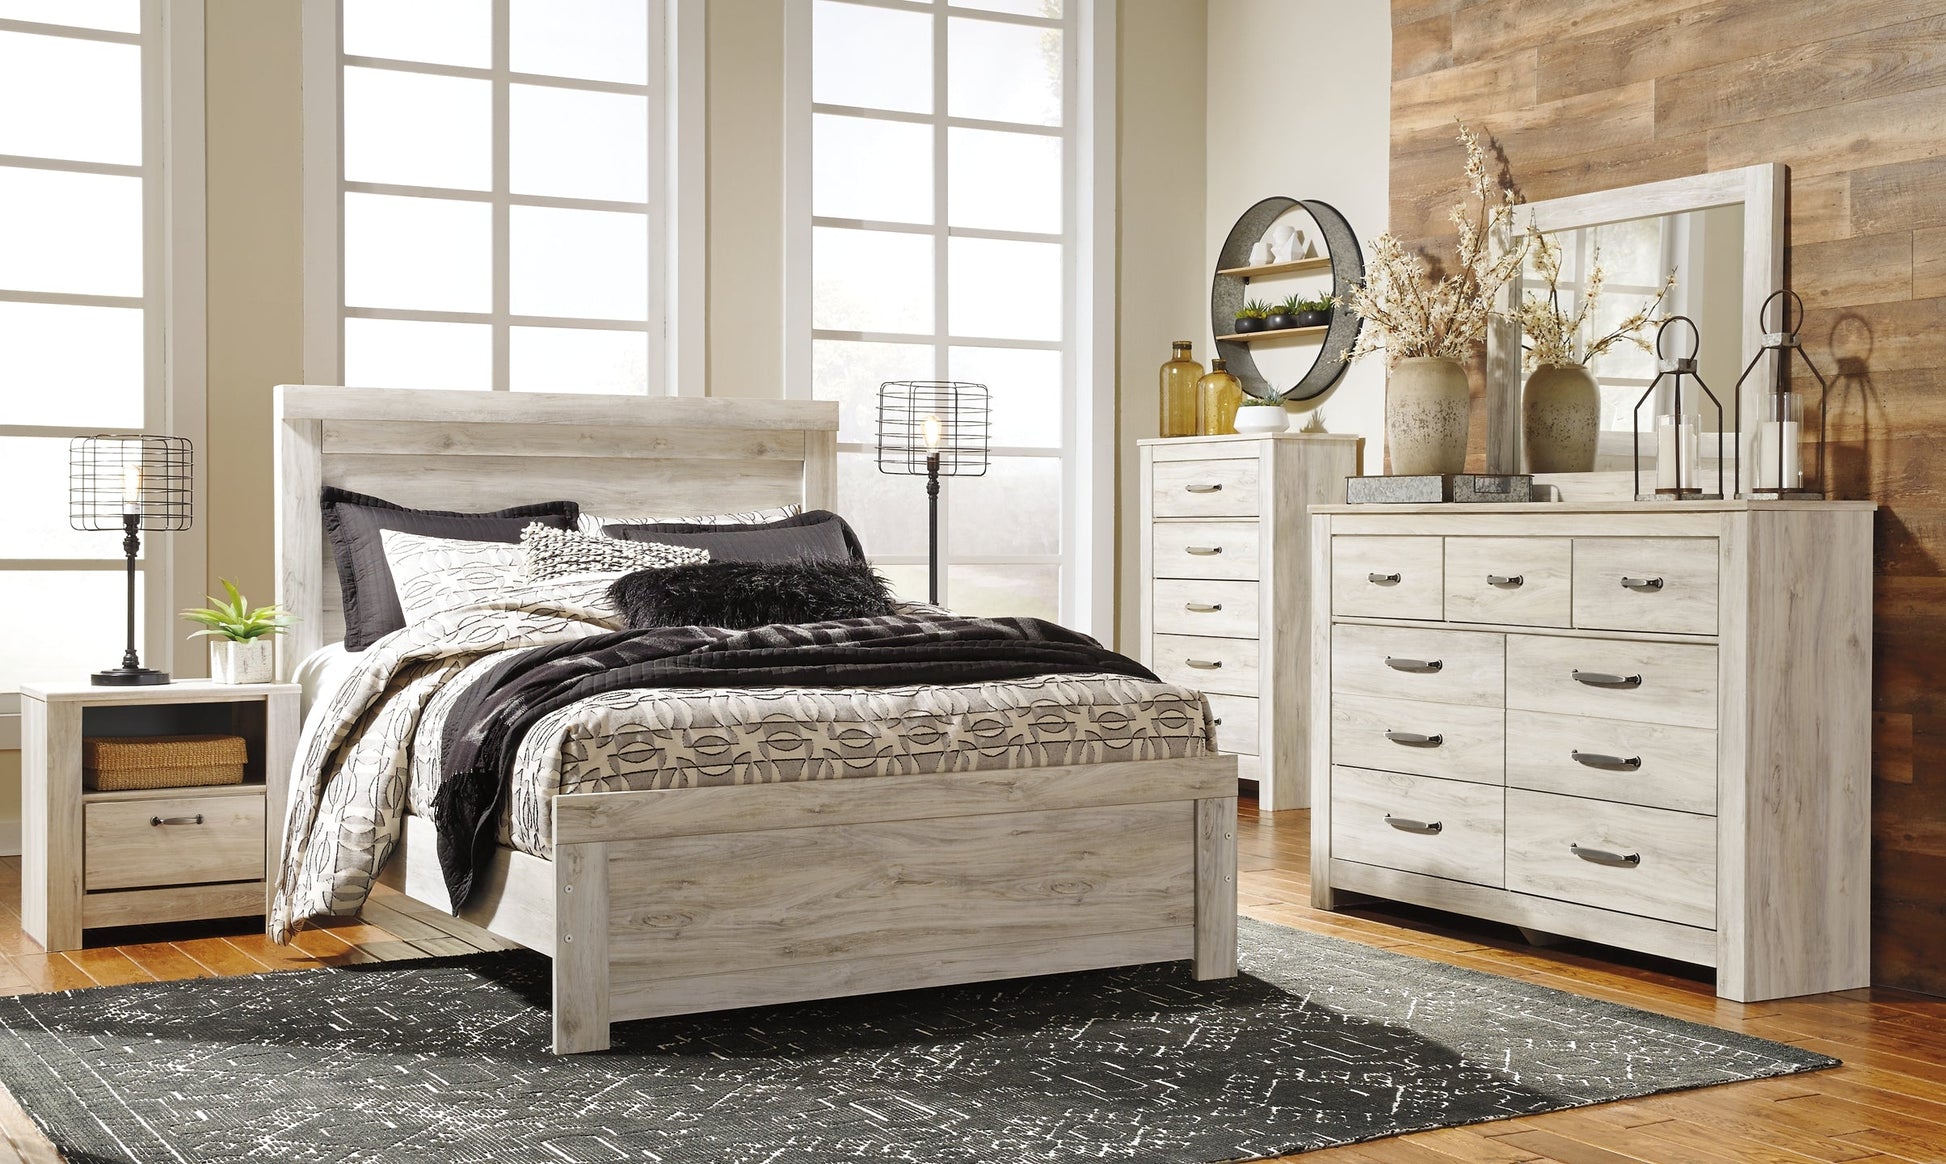 Bellaby Dresser and Mirror at Walker Mattress and Furniture Locations in Cedar Park and Belton TX.